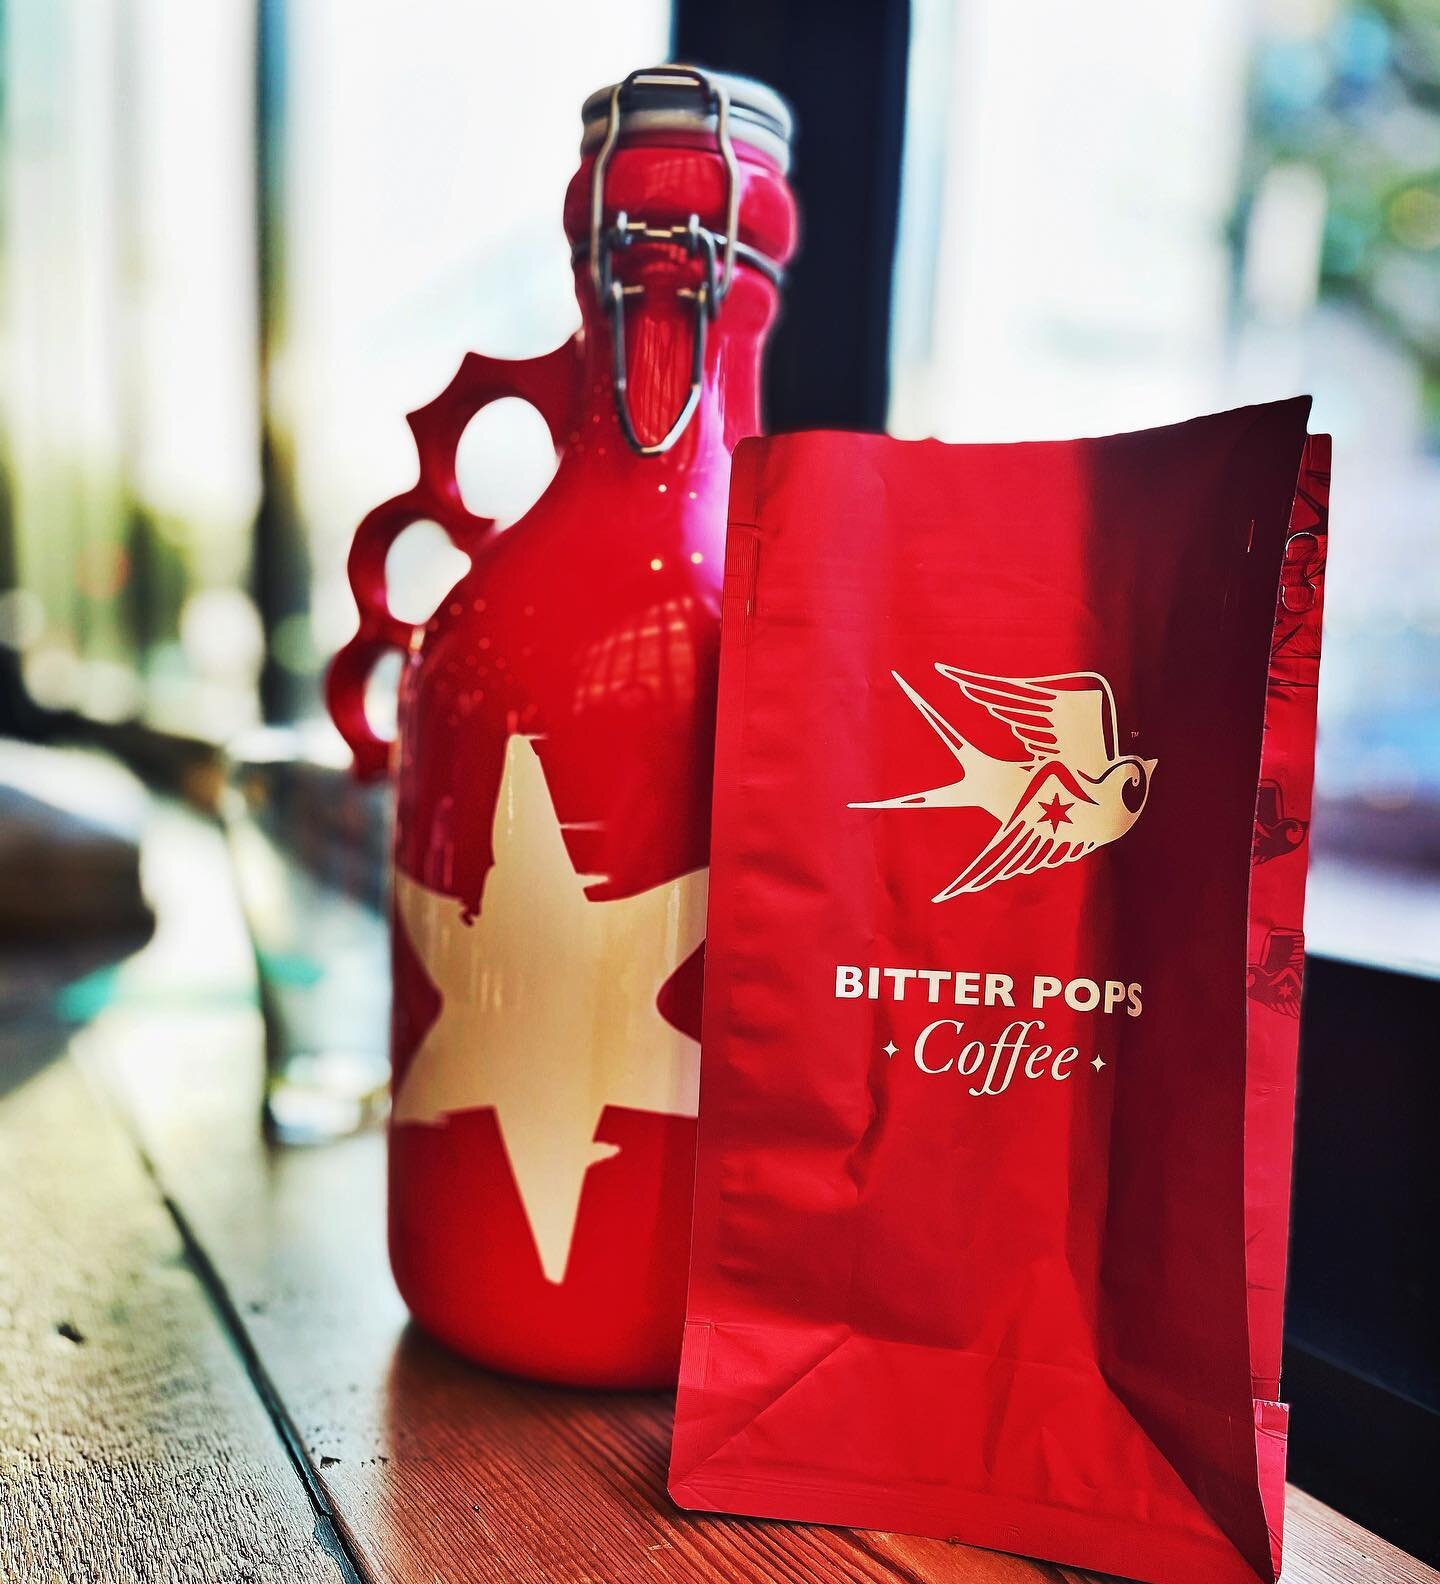 Oh shit. Go to @bitterpops for all of it. Hexe roasted coffee, all the local beers, amazing food! Coming soon. You know!🔪💋